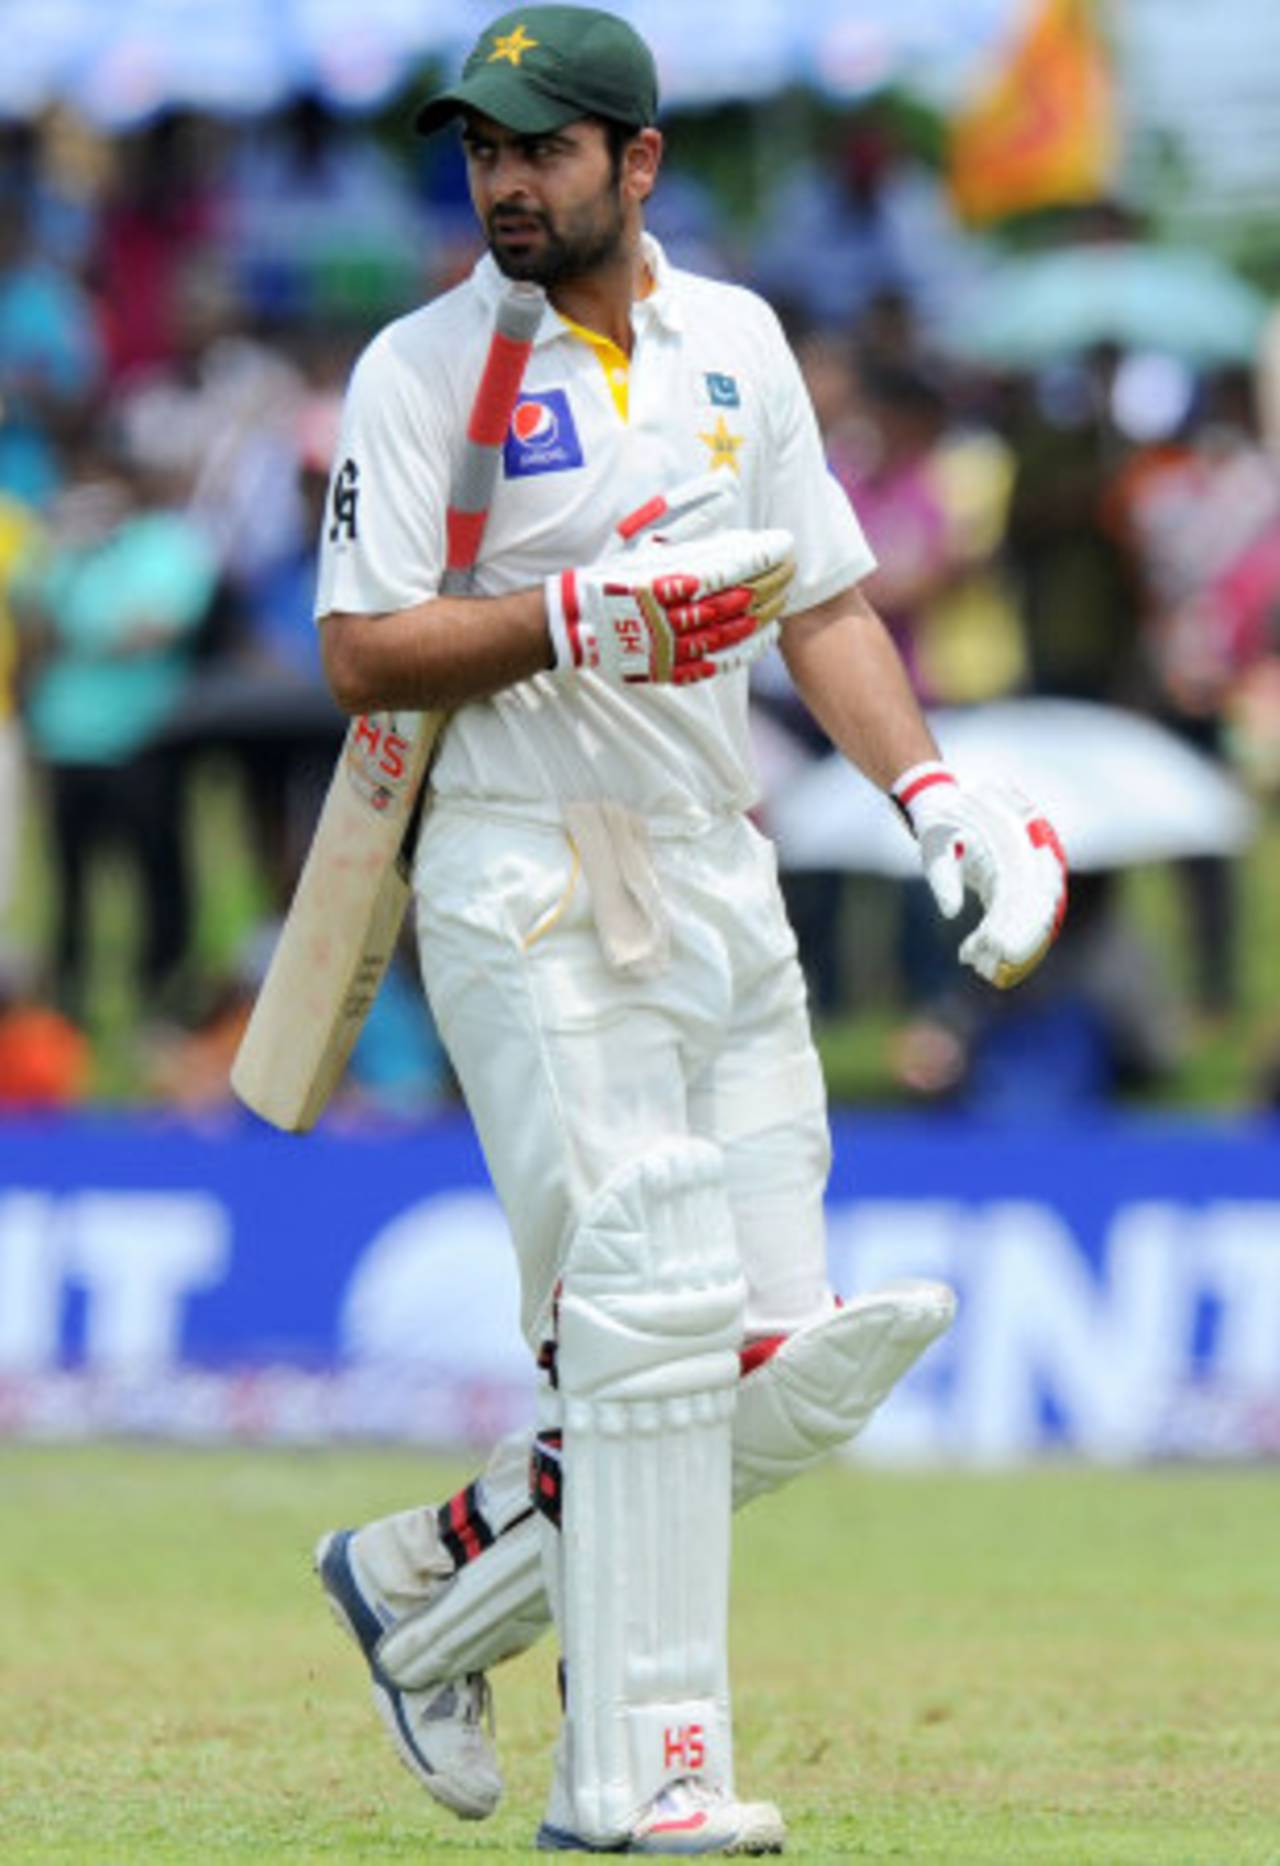 Ahmed Shehzad walks off after being lbw for 16, Sri Lanka v Pakistan, 1st Test, Galle, 5th day, August 10, 2014